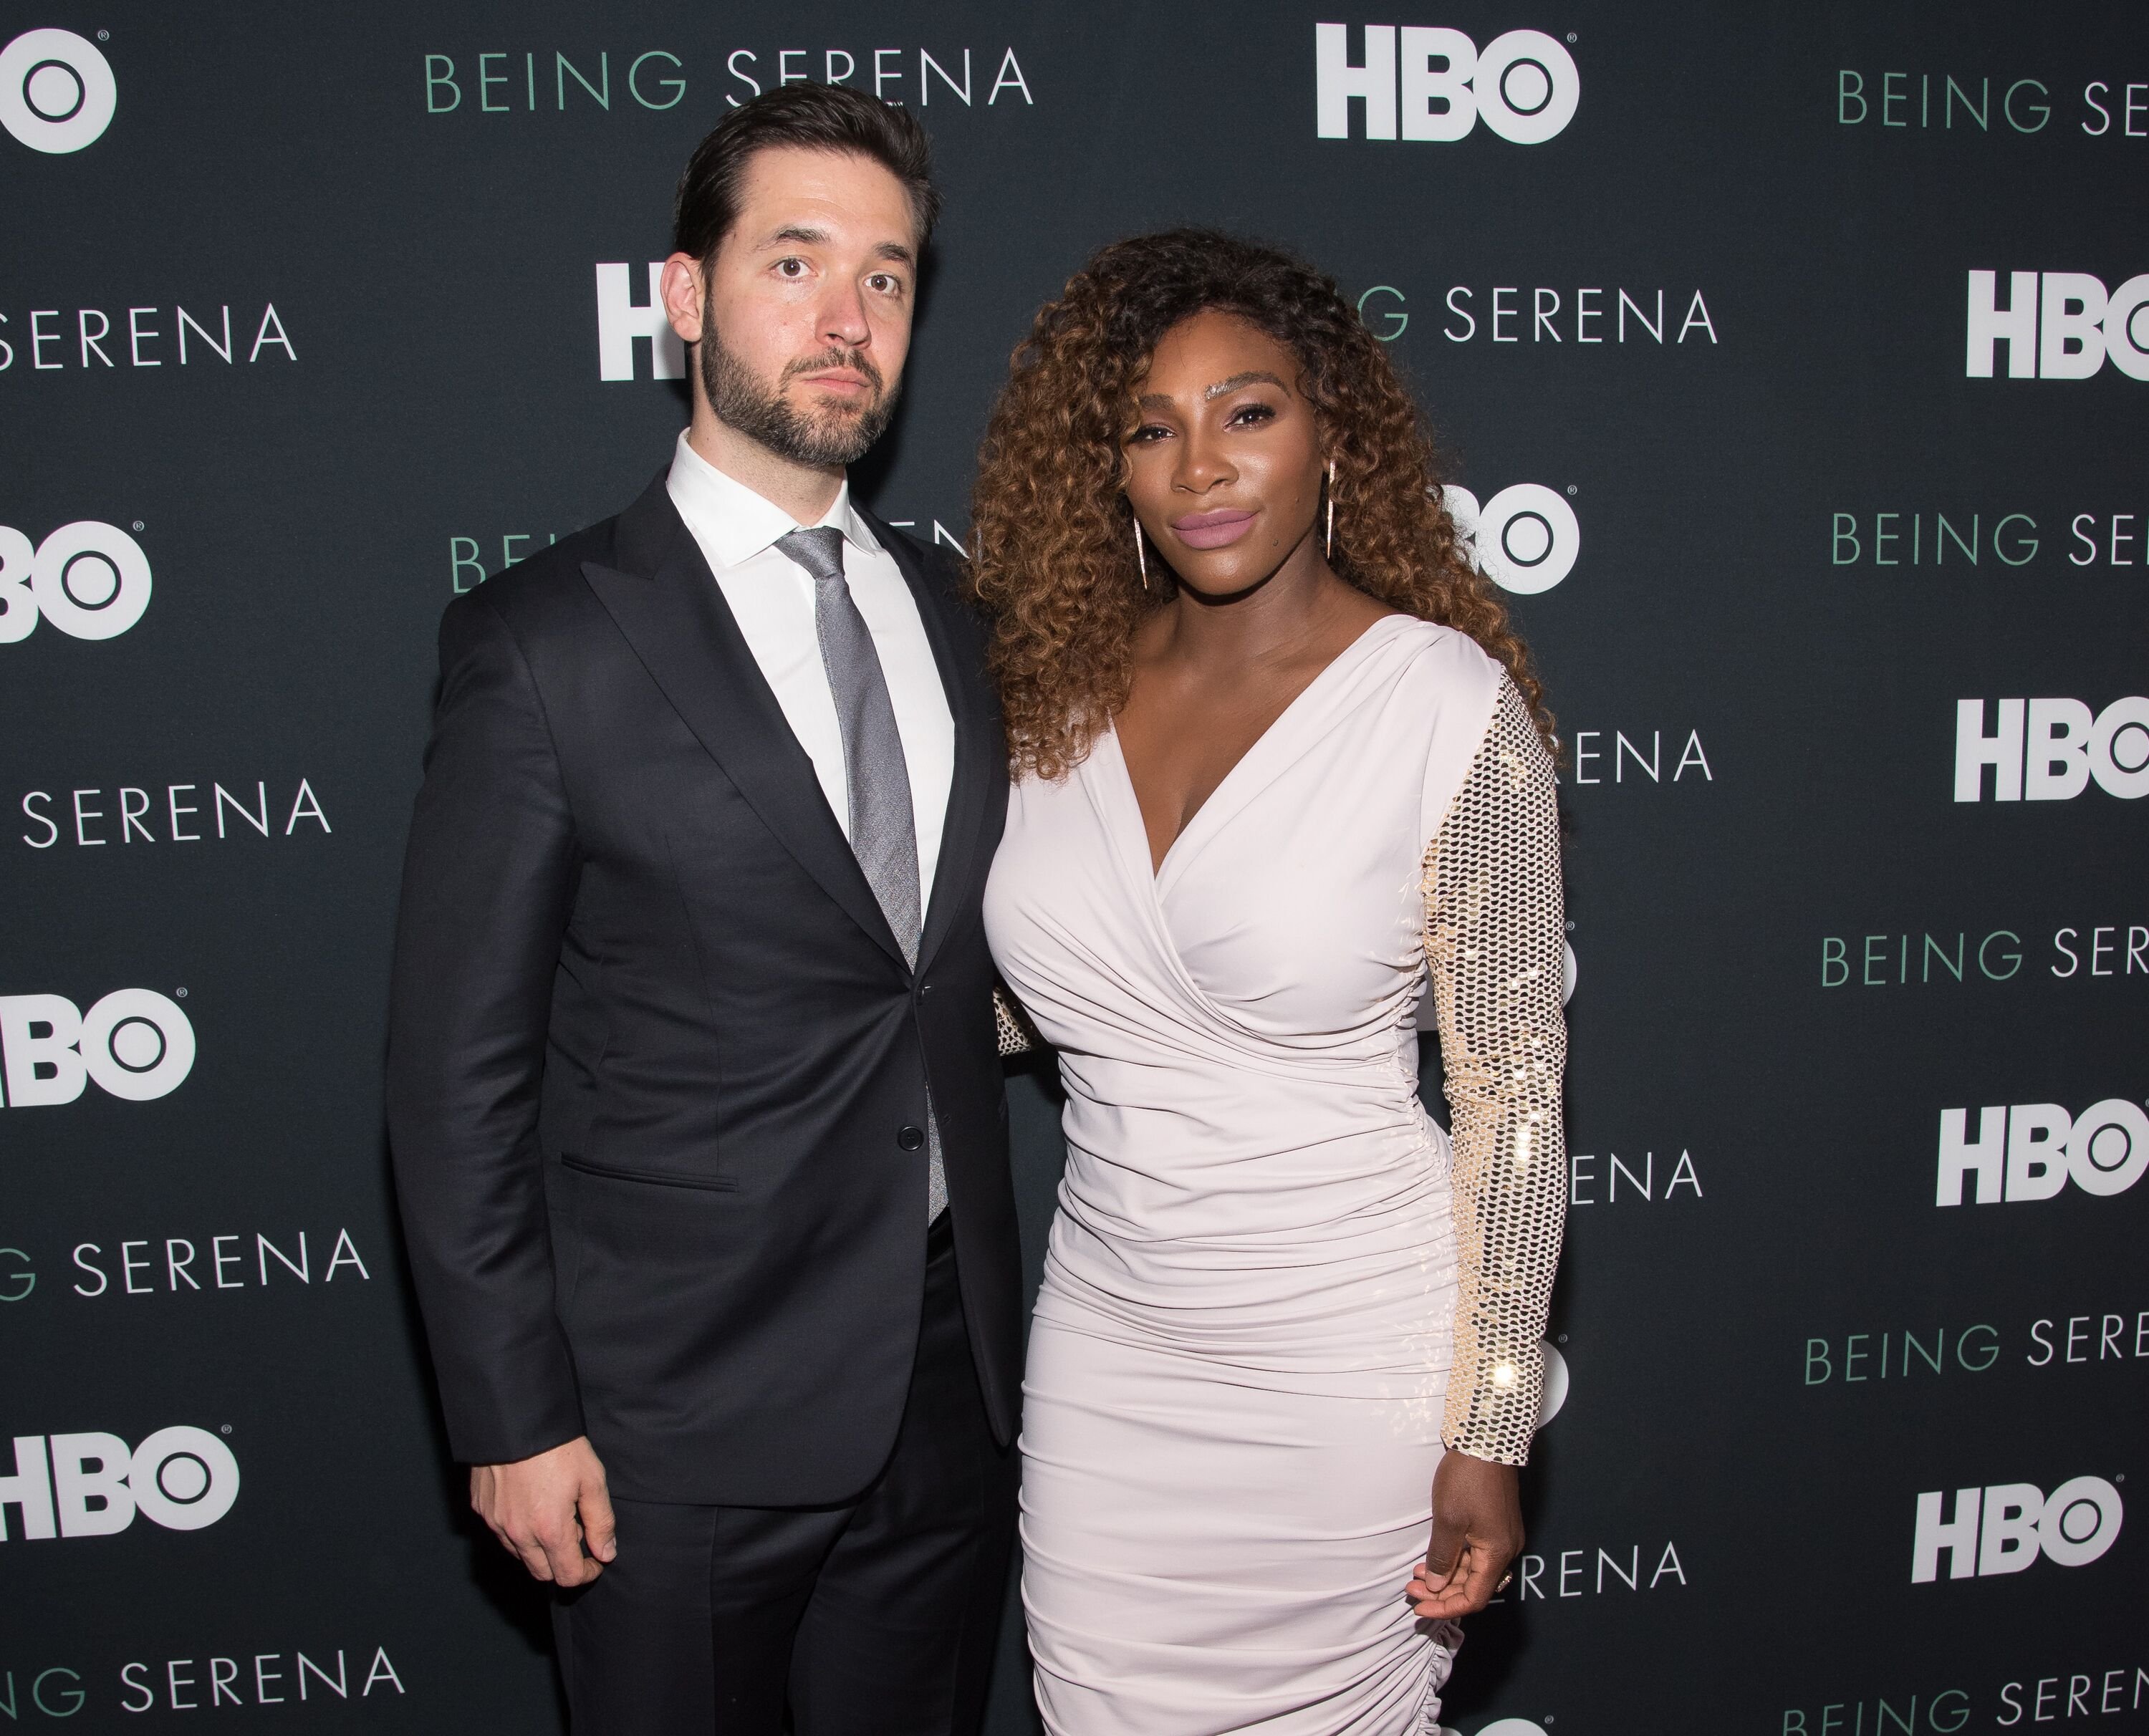 Serena Williams and husband Alexis Ohanian attend the "Being Serena" New York Premiere in April 2018. | Photo: Getty Images